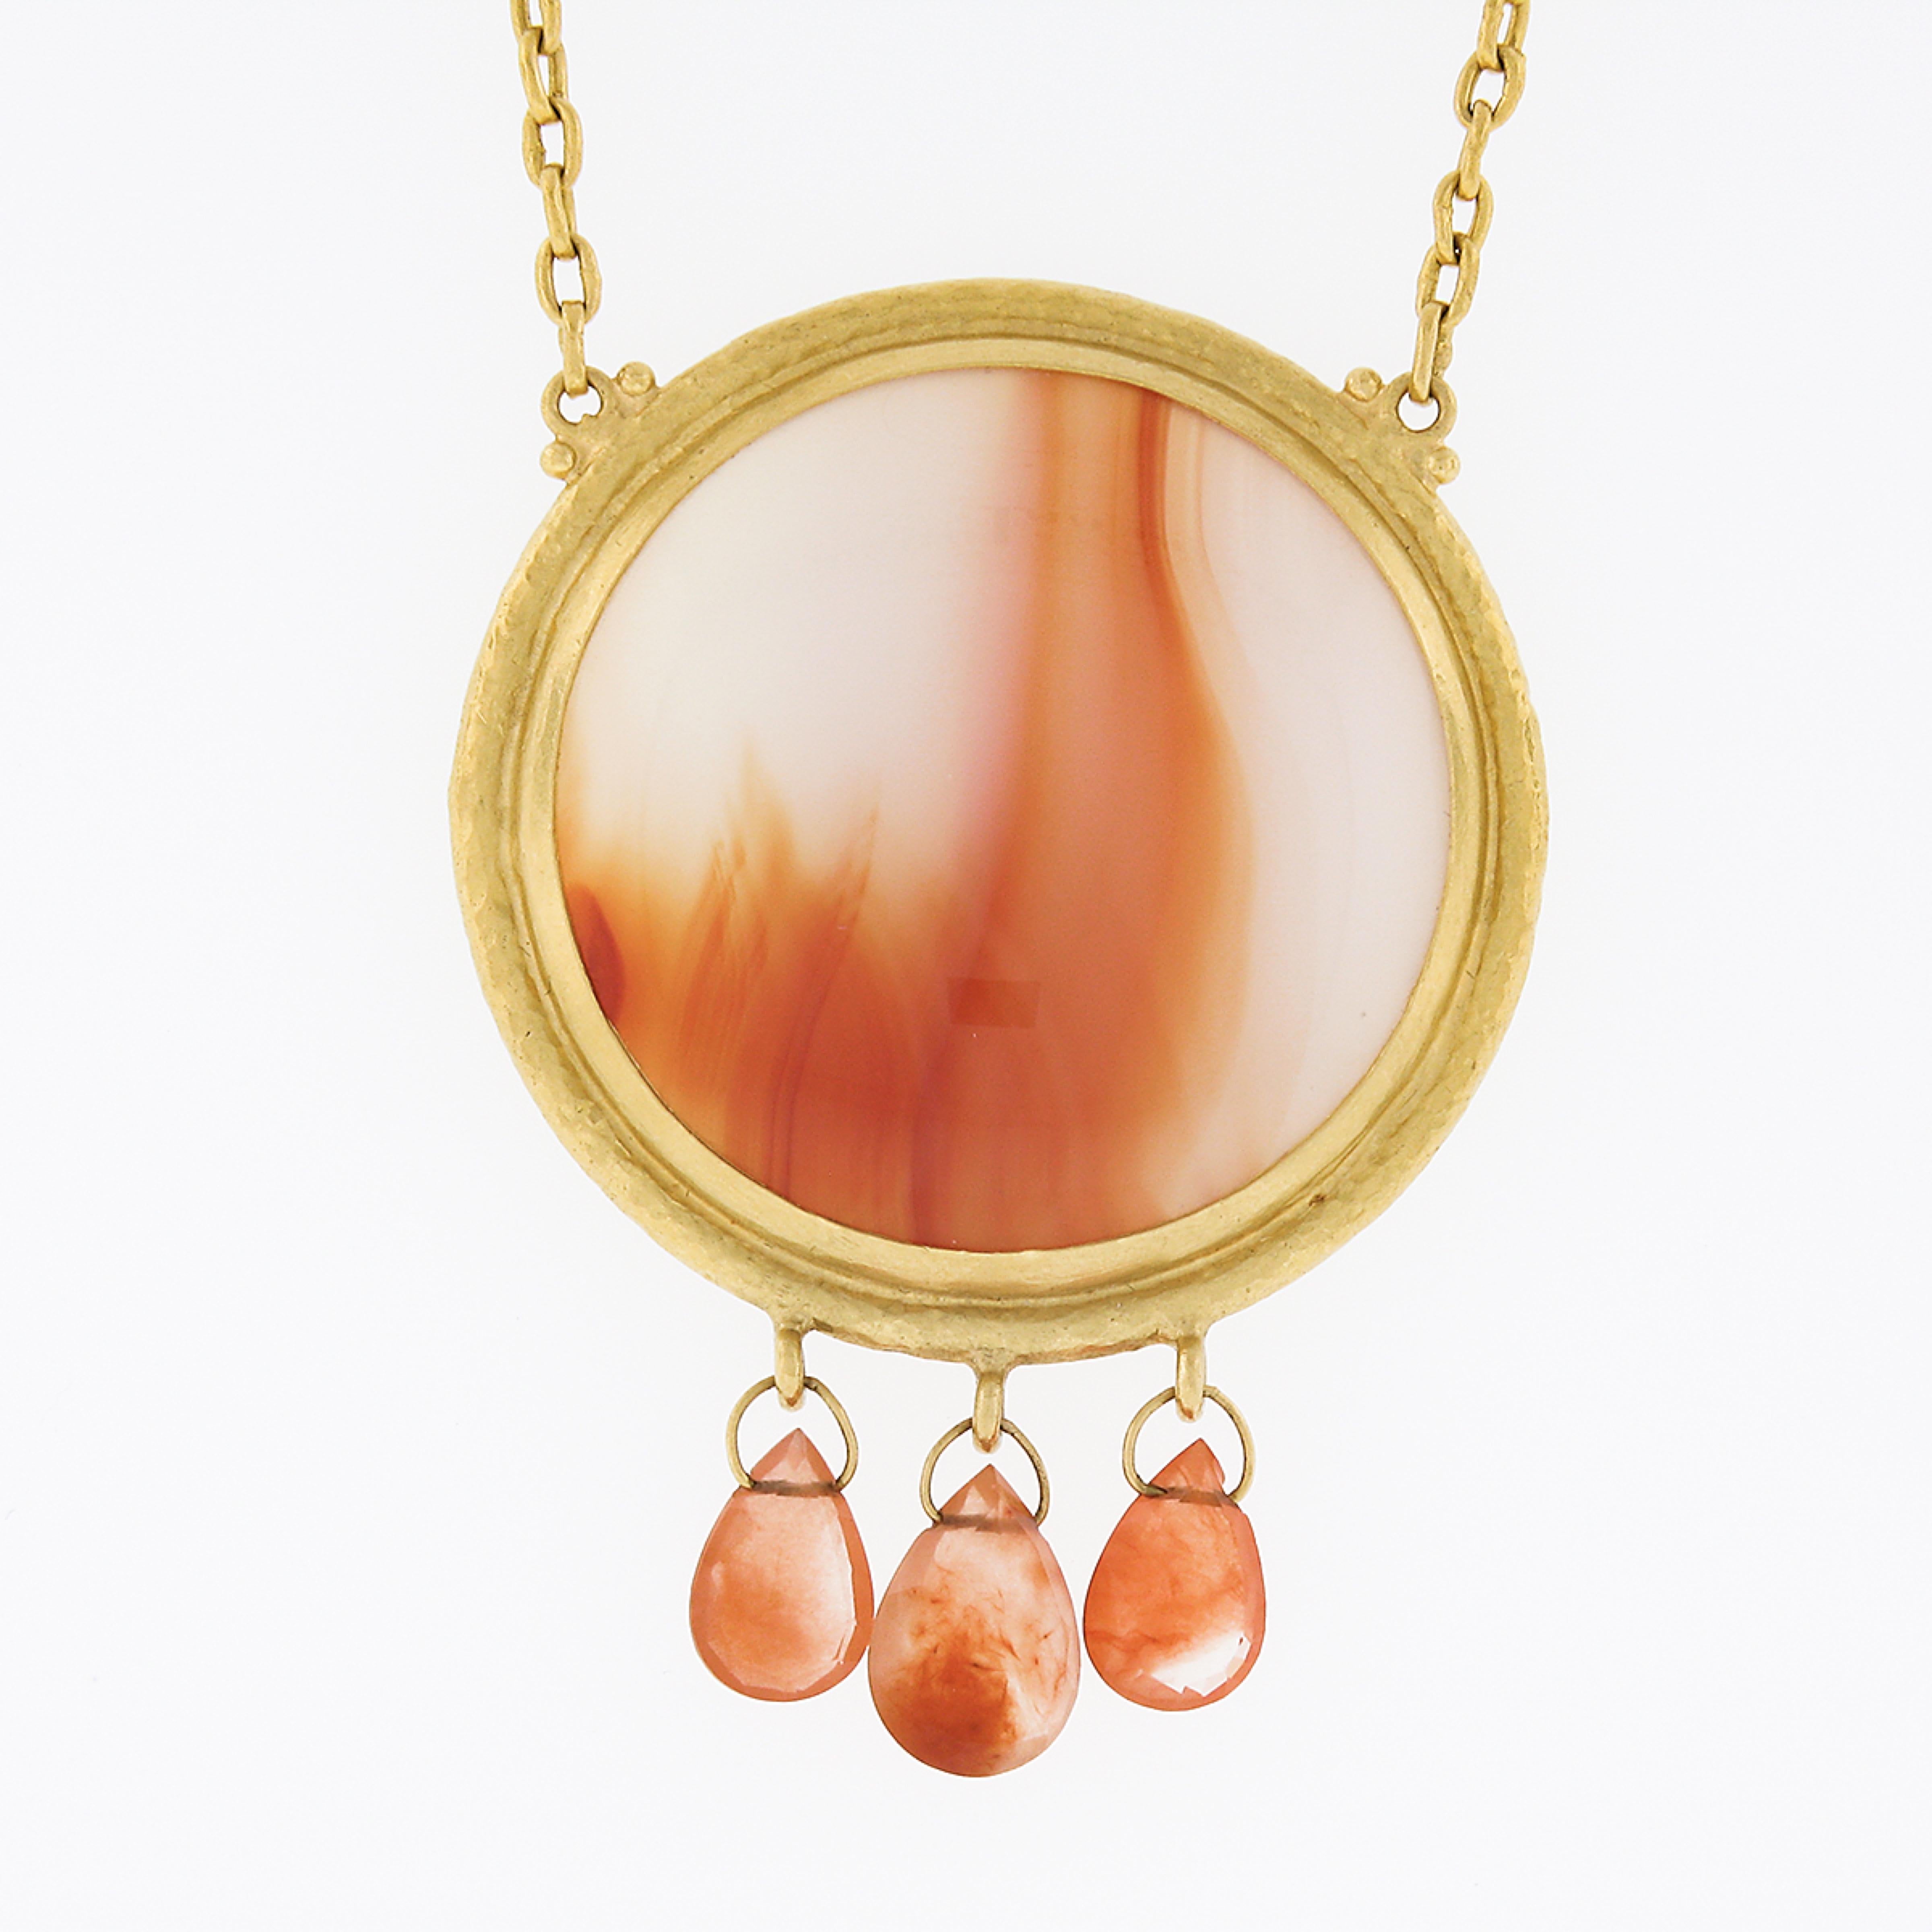 Here we have a magnificent, truly bold, and very well made Gurhan pendant necklace that was crafted in solid 24k yellow gold featuring a large round cabochon cut agate neatly bezel set at the center. This incredible stone measures approximately